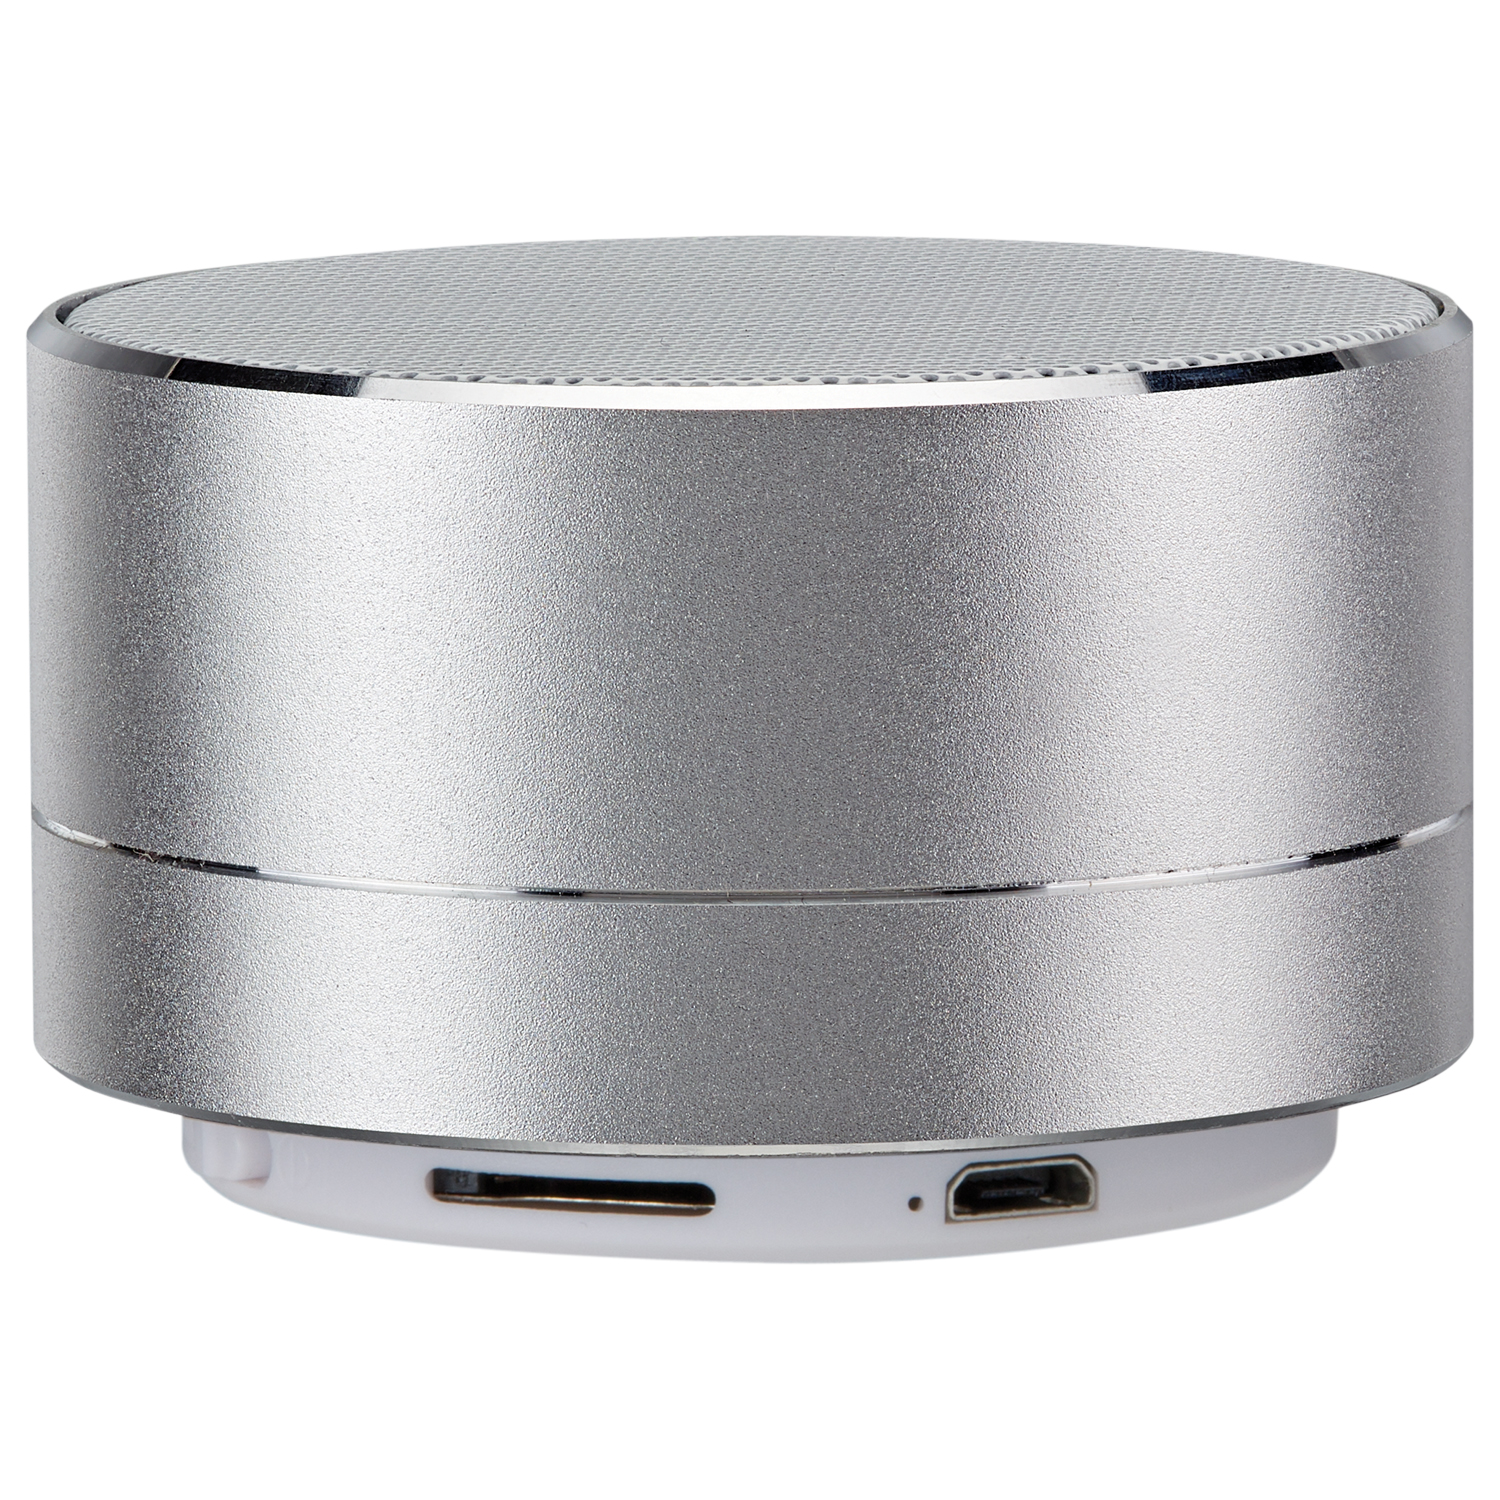 iLive Portable Bluetooth Speaker, Silver, ISB08 - image 5 of 6